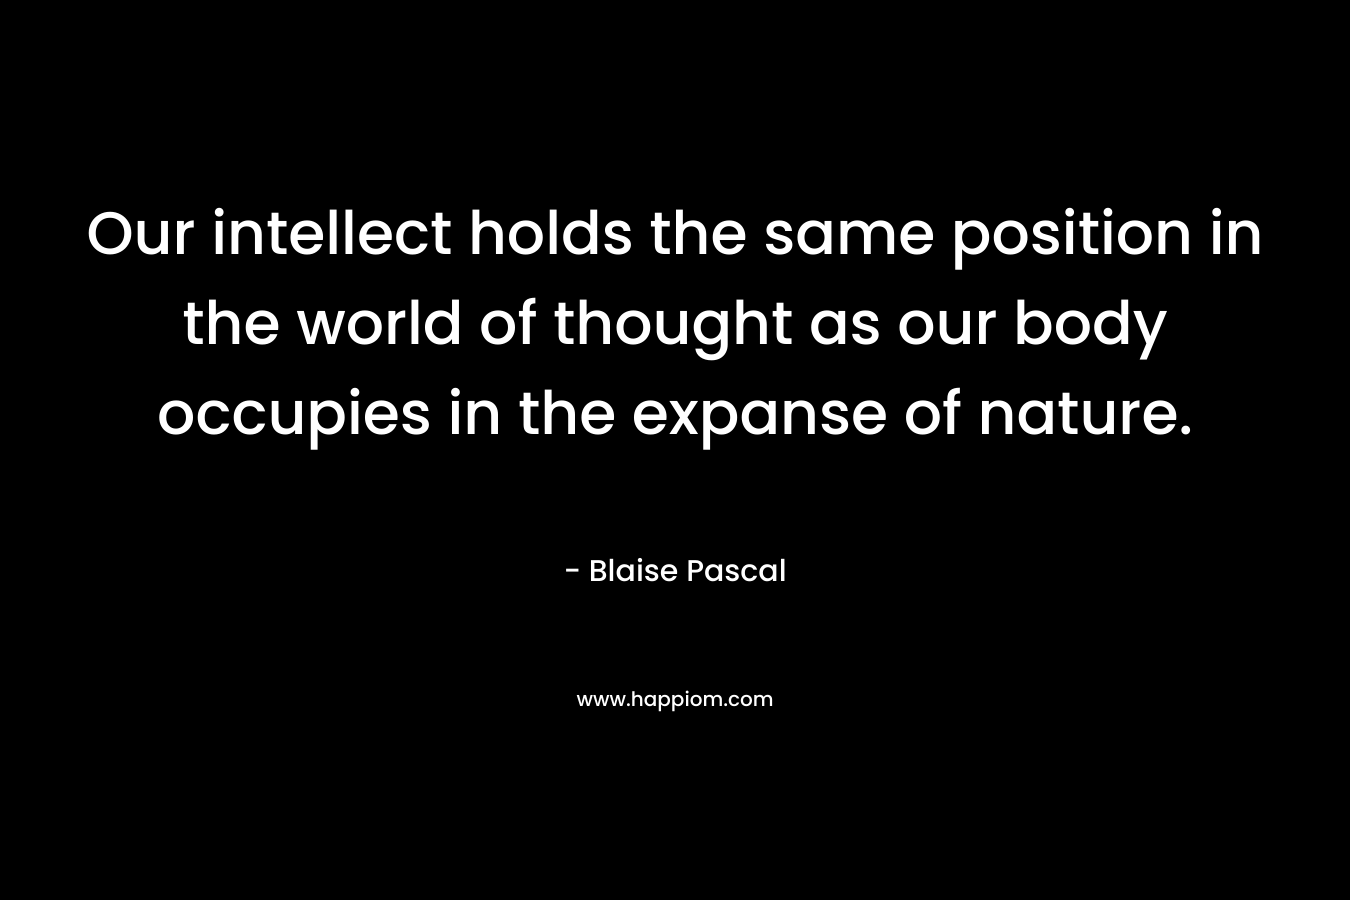 Our intellect holds the same position in the world of thought as our body occupies in the expanse of nature. – Blaise Pascal